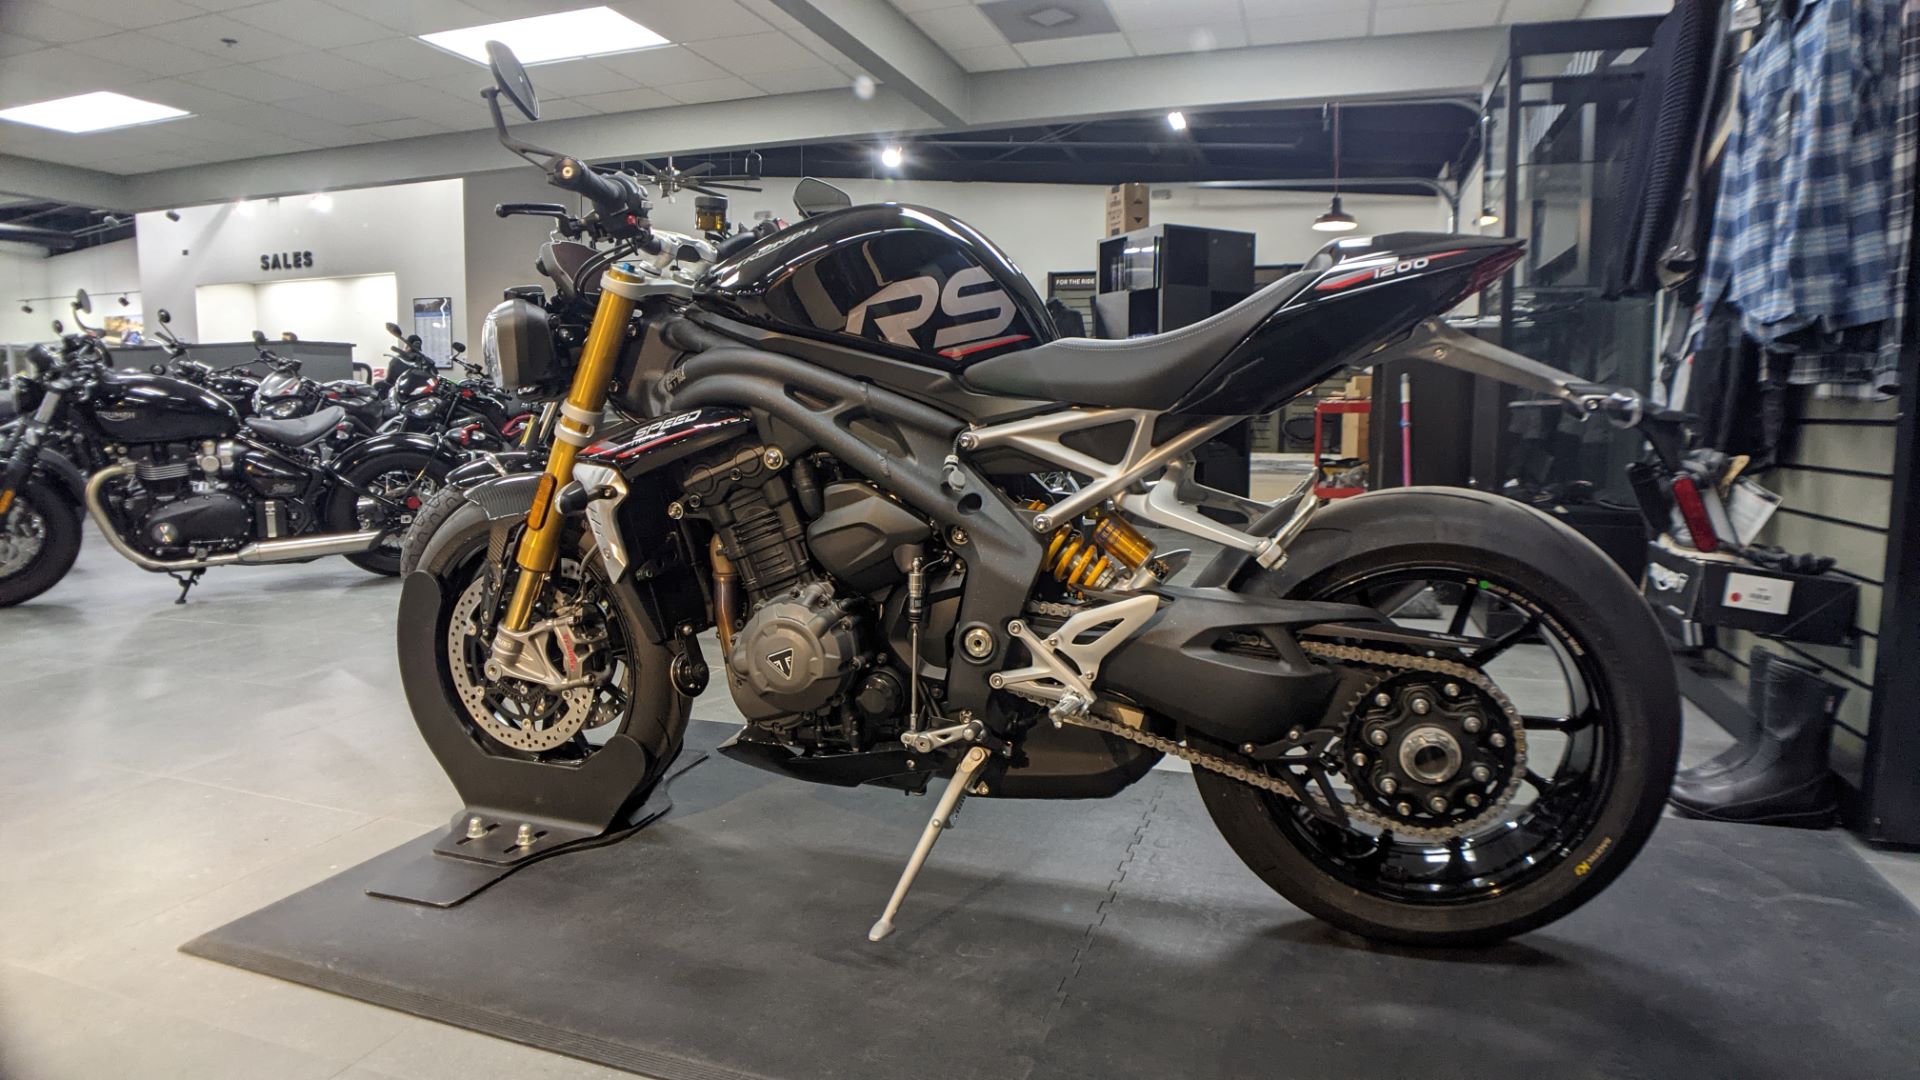 2022 Triumph Speed Triple 1200 RS in Greer, South Carolina - Photo 16